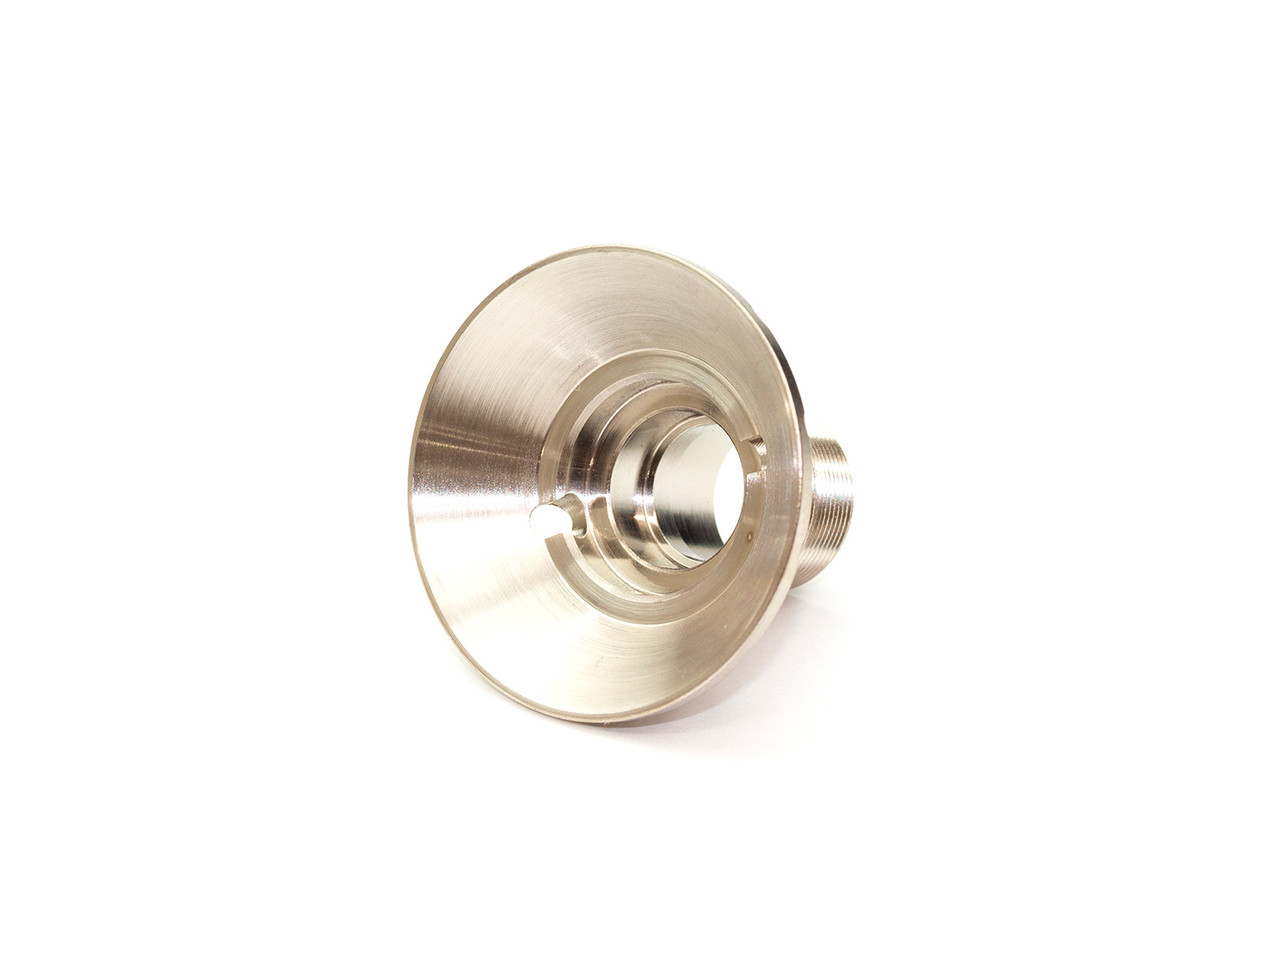 R0386S5 - CLUTCH BELL (IF18-3)